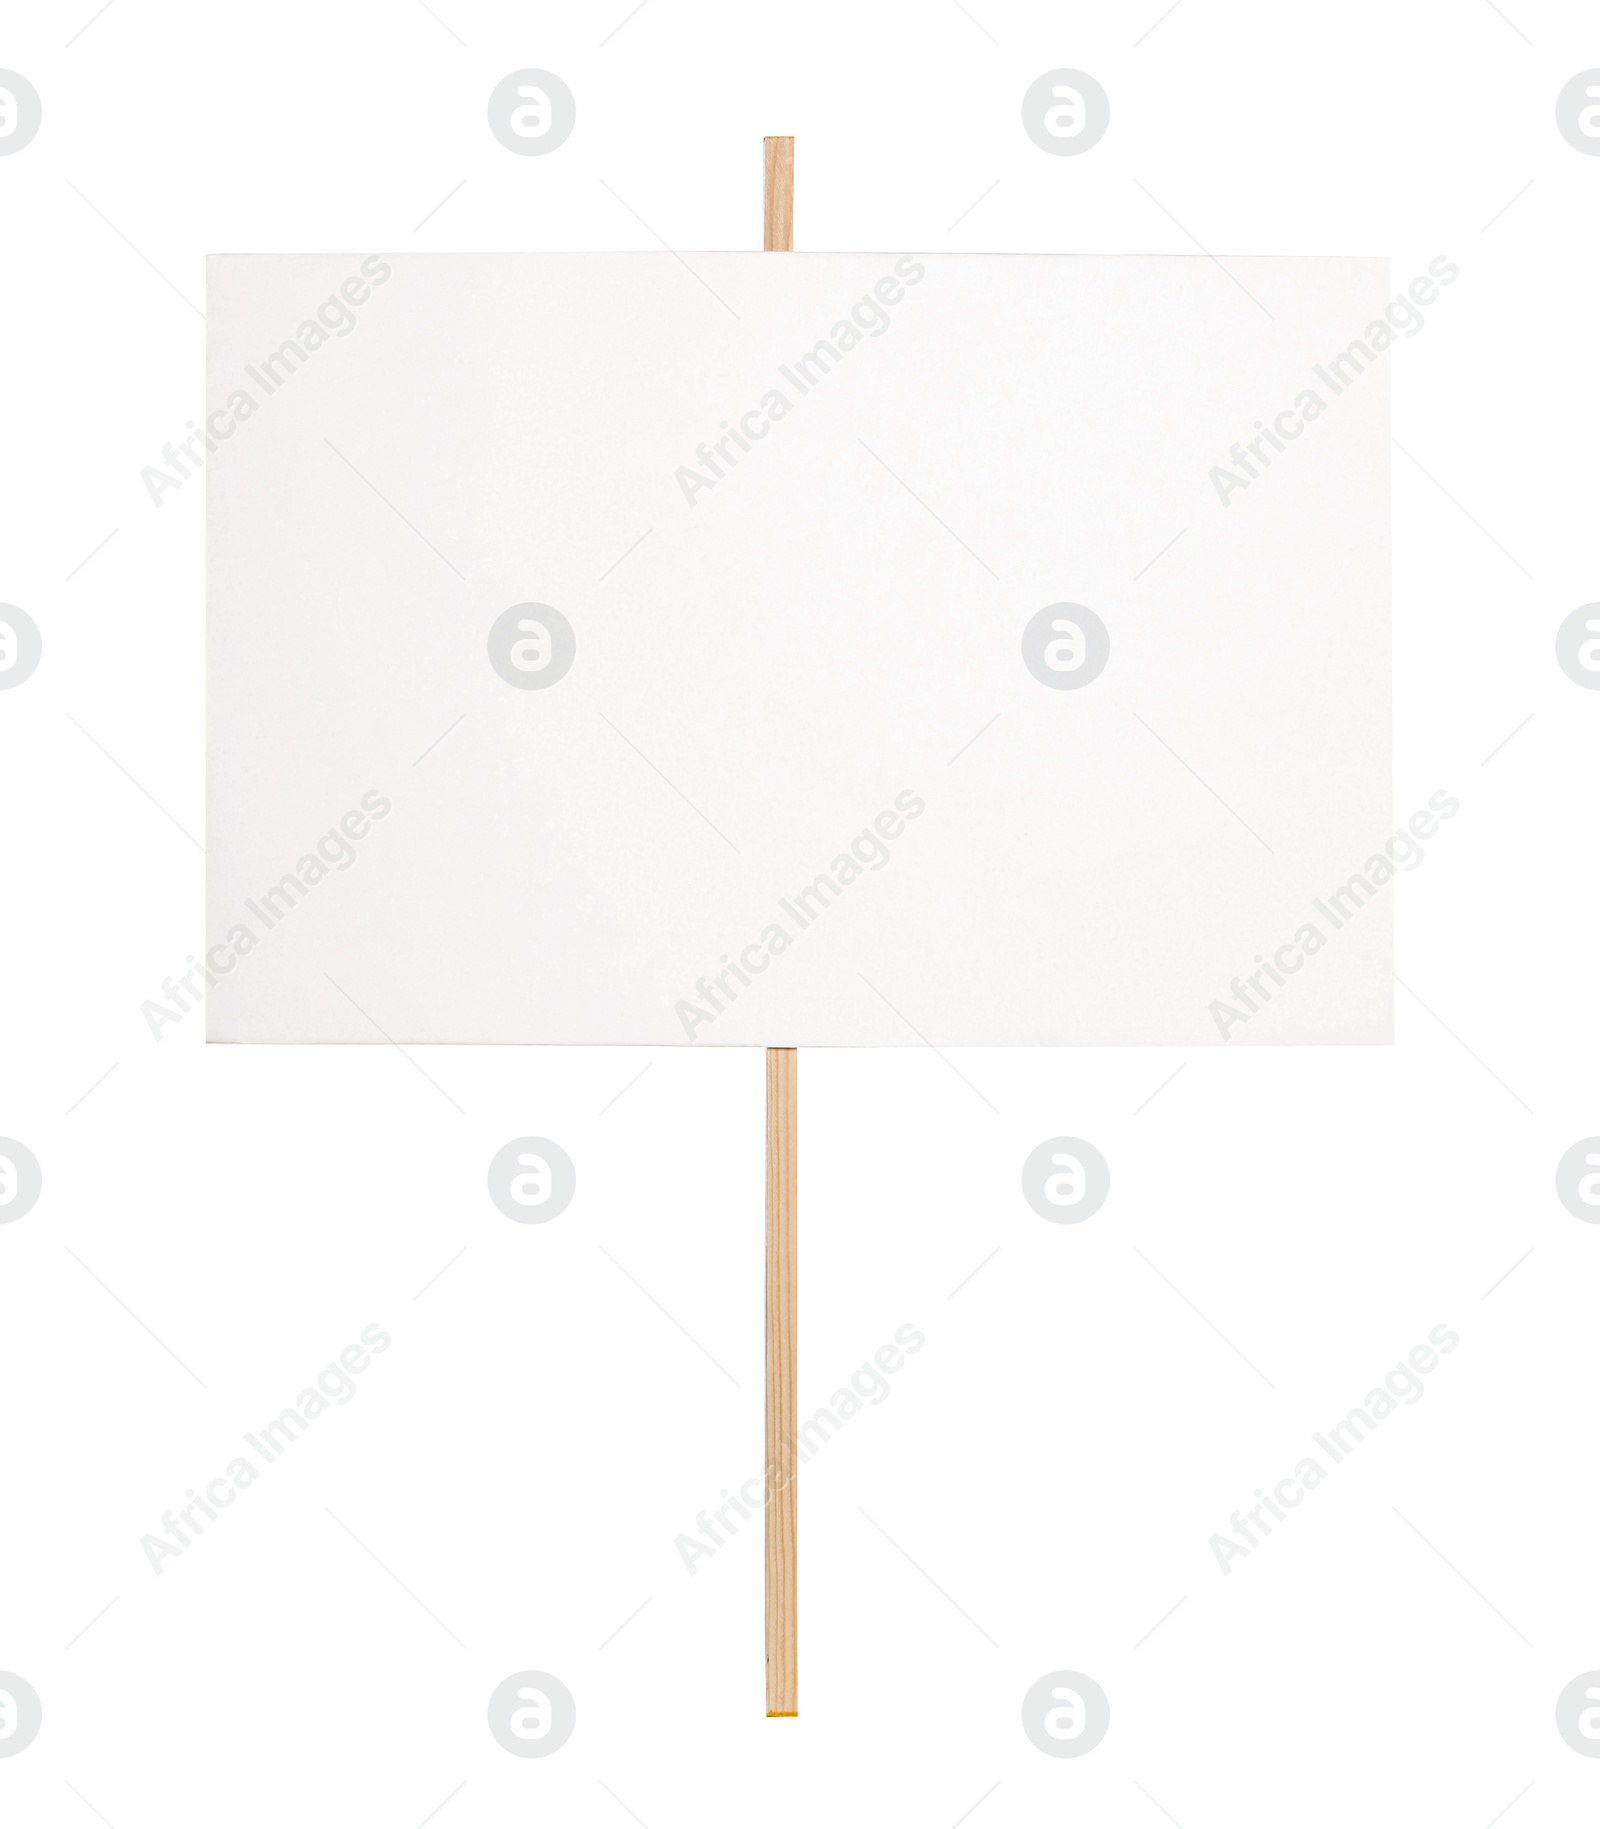 Photo of One blank protest sign isolated on white